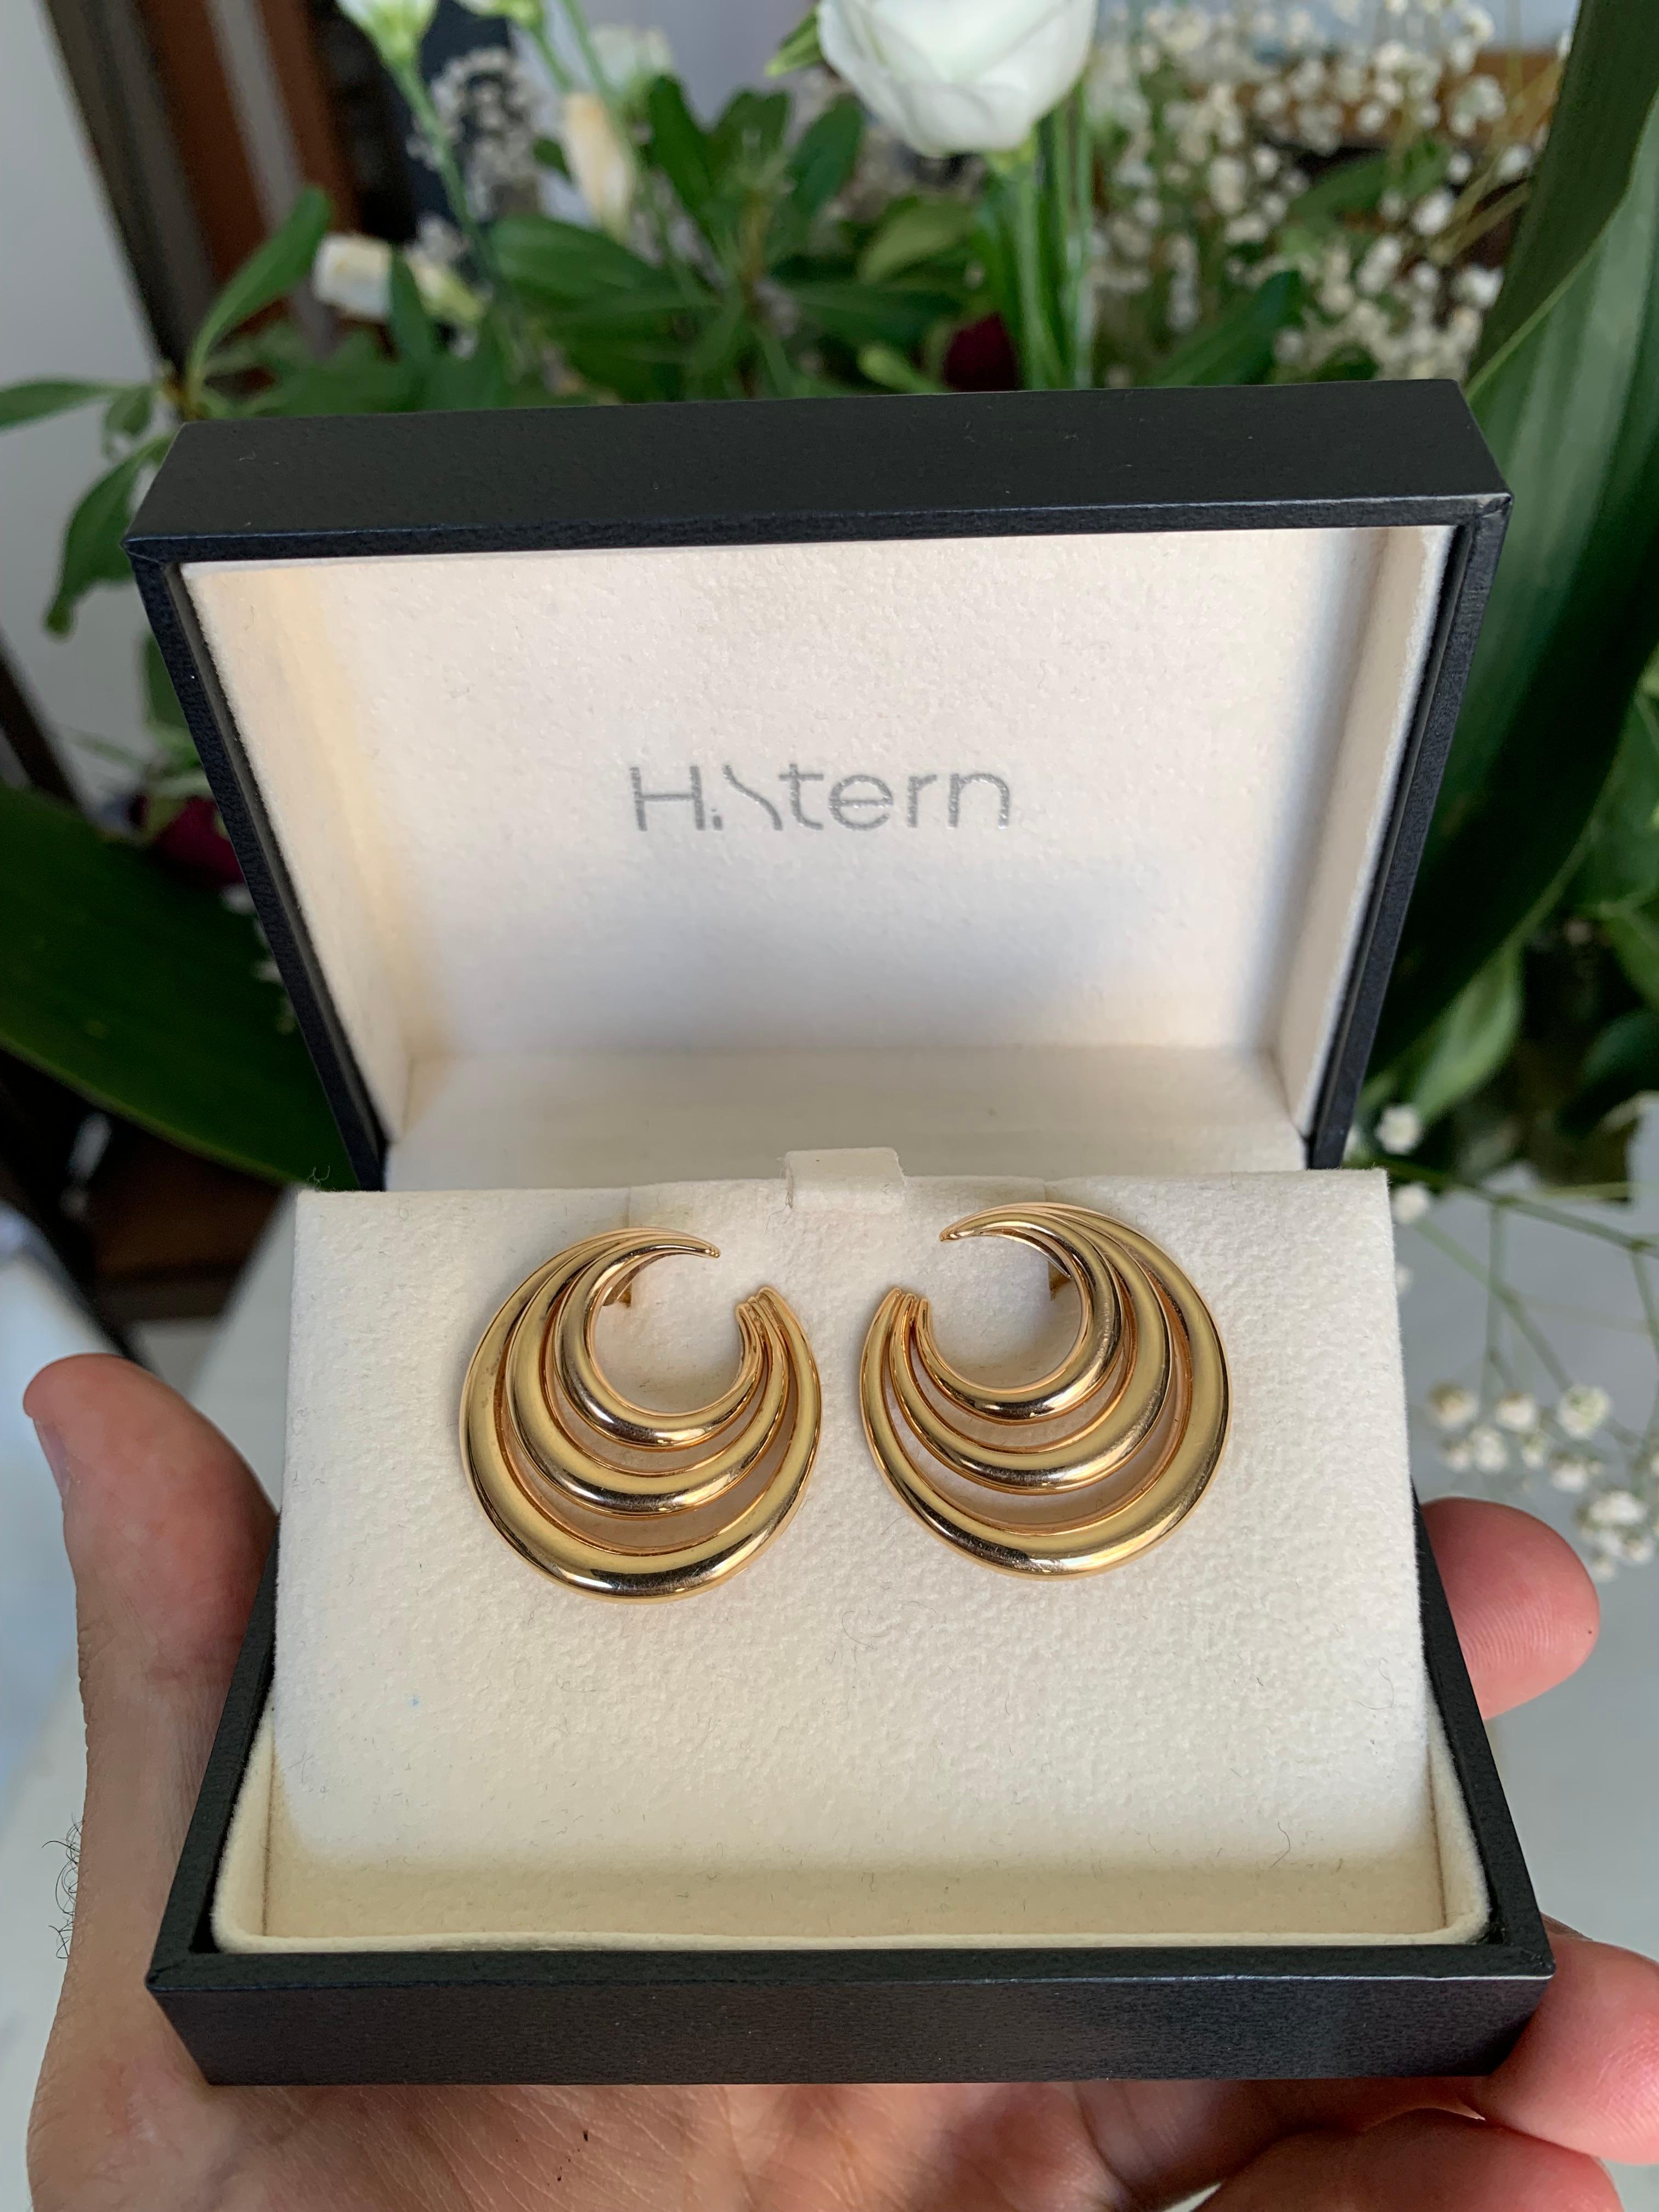 sterns 9ct gold earrings